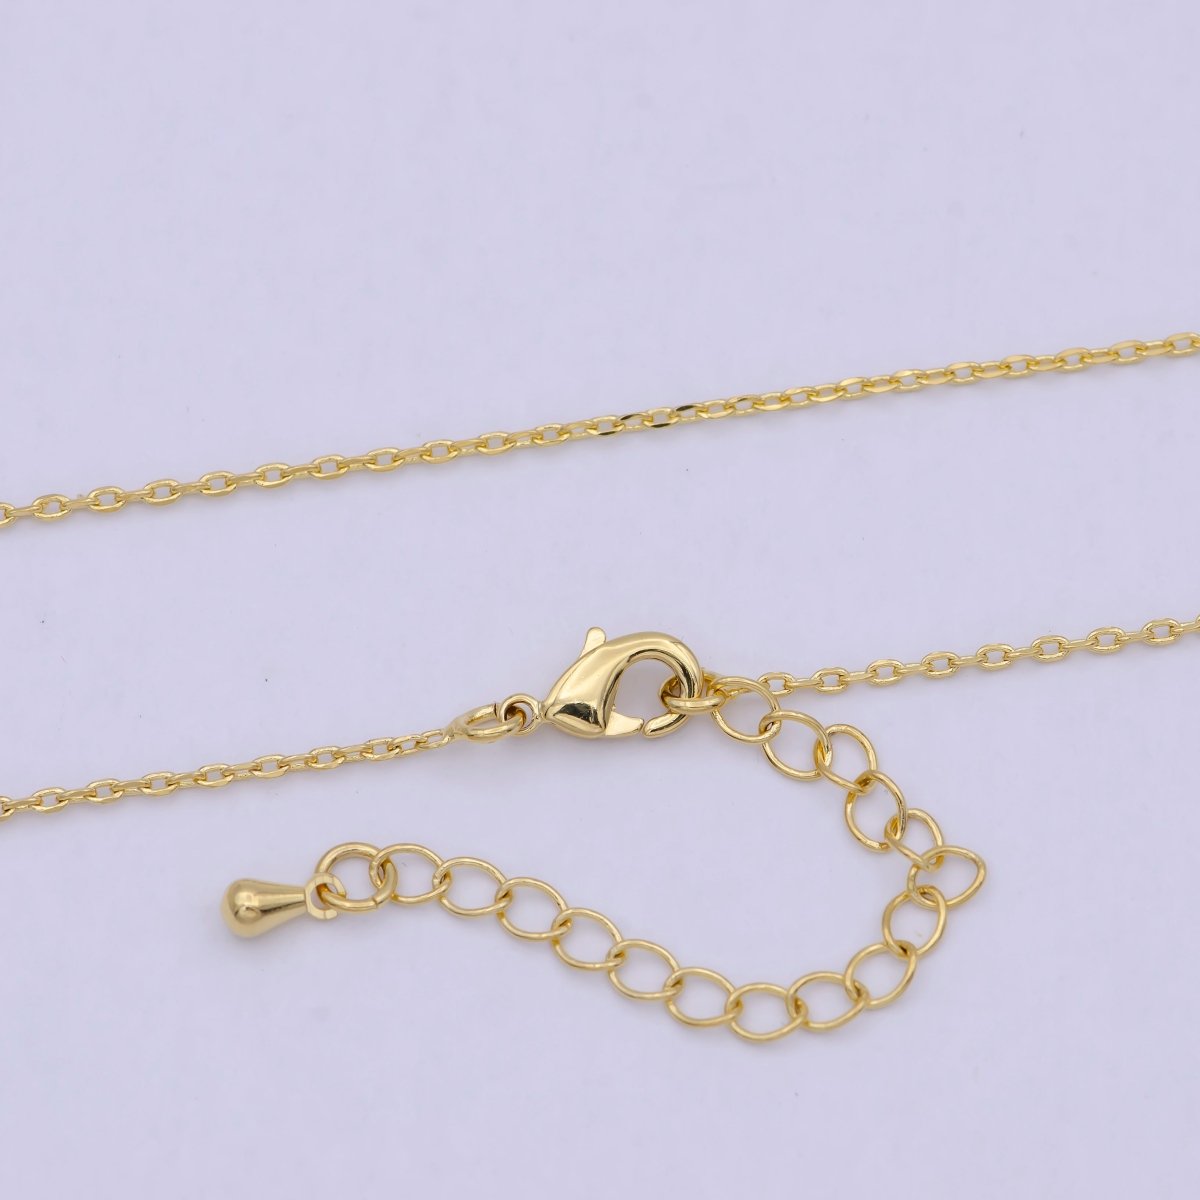 24K Gold Filled 1.5mm Dainty Cable 18 Inch Layering Chain Necklace w. Extender | WA-792 - DLUXCA